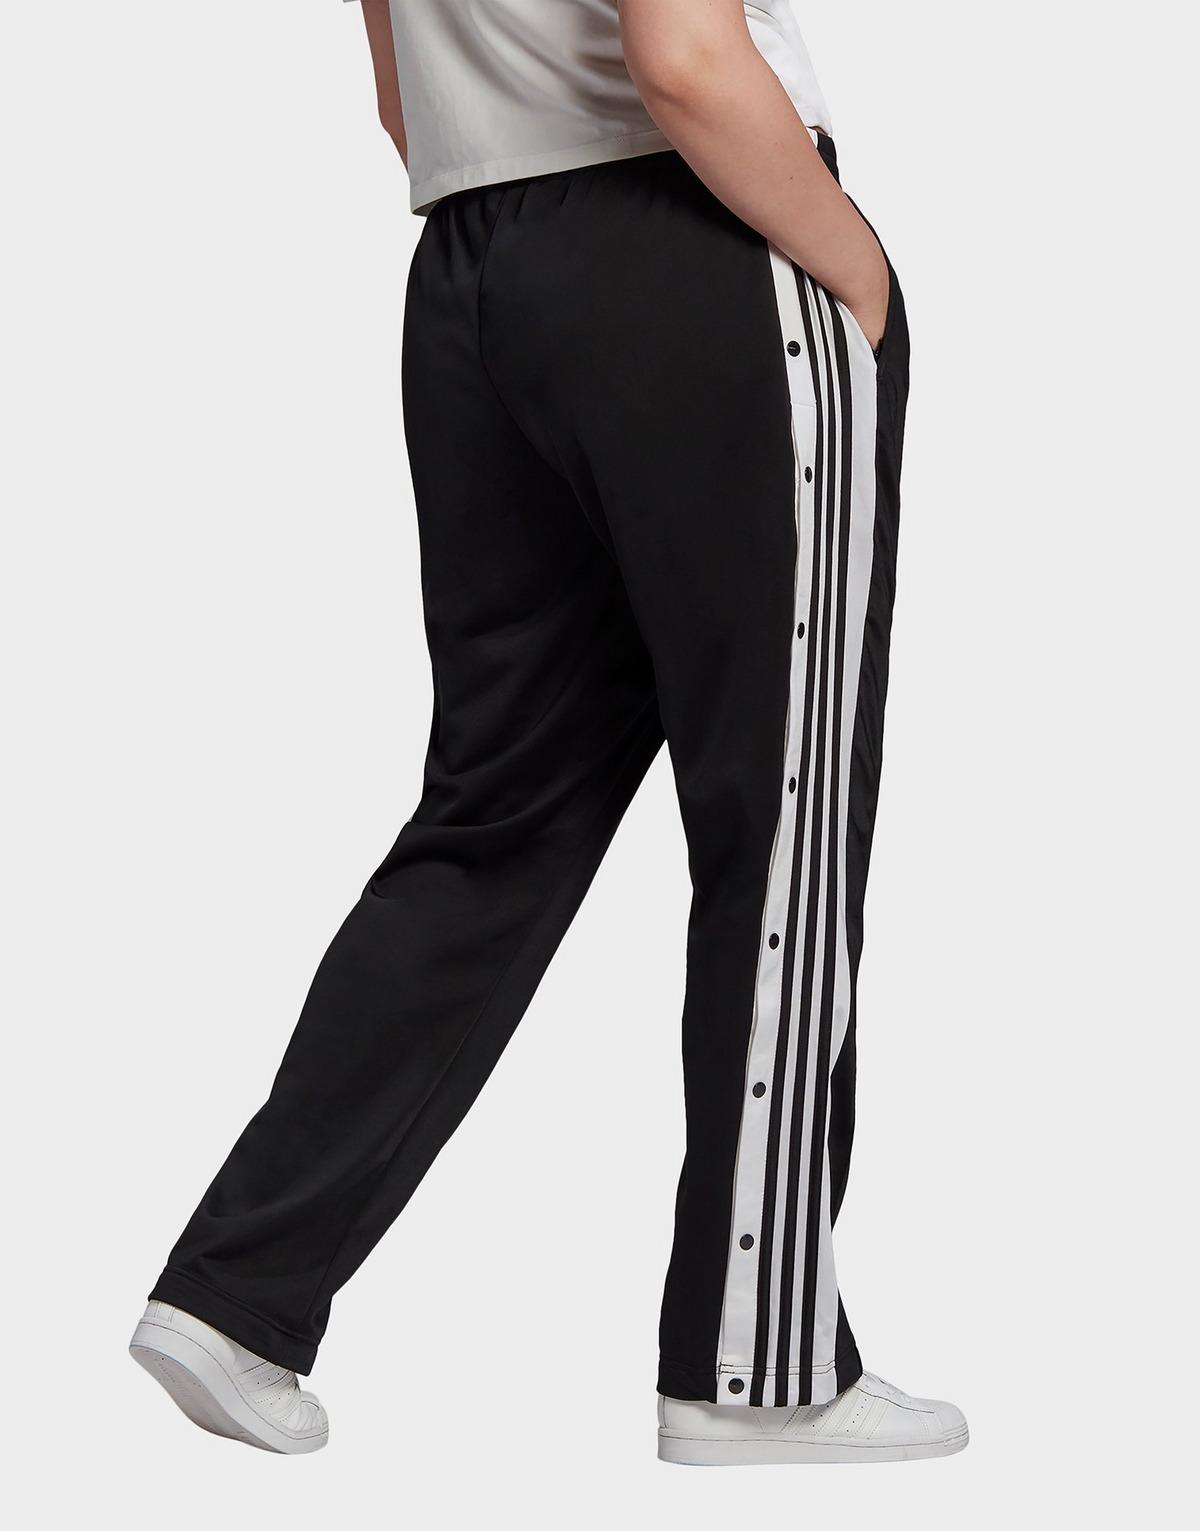 Buy > plus size womens adidas jogging suits > in stock